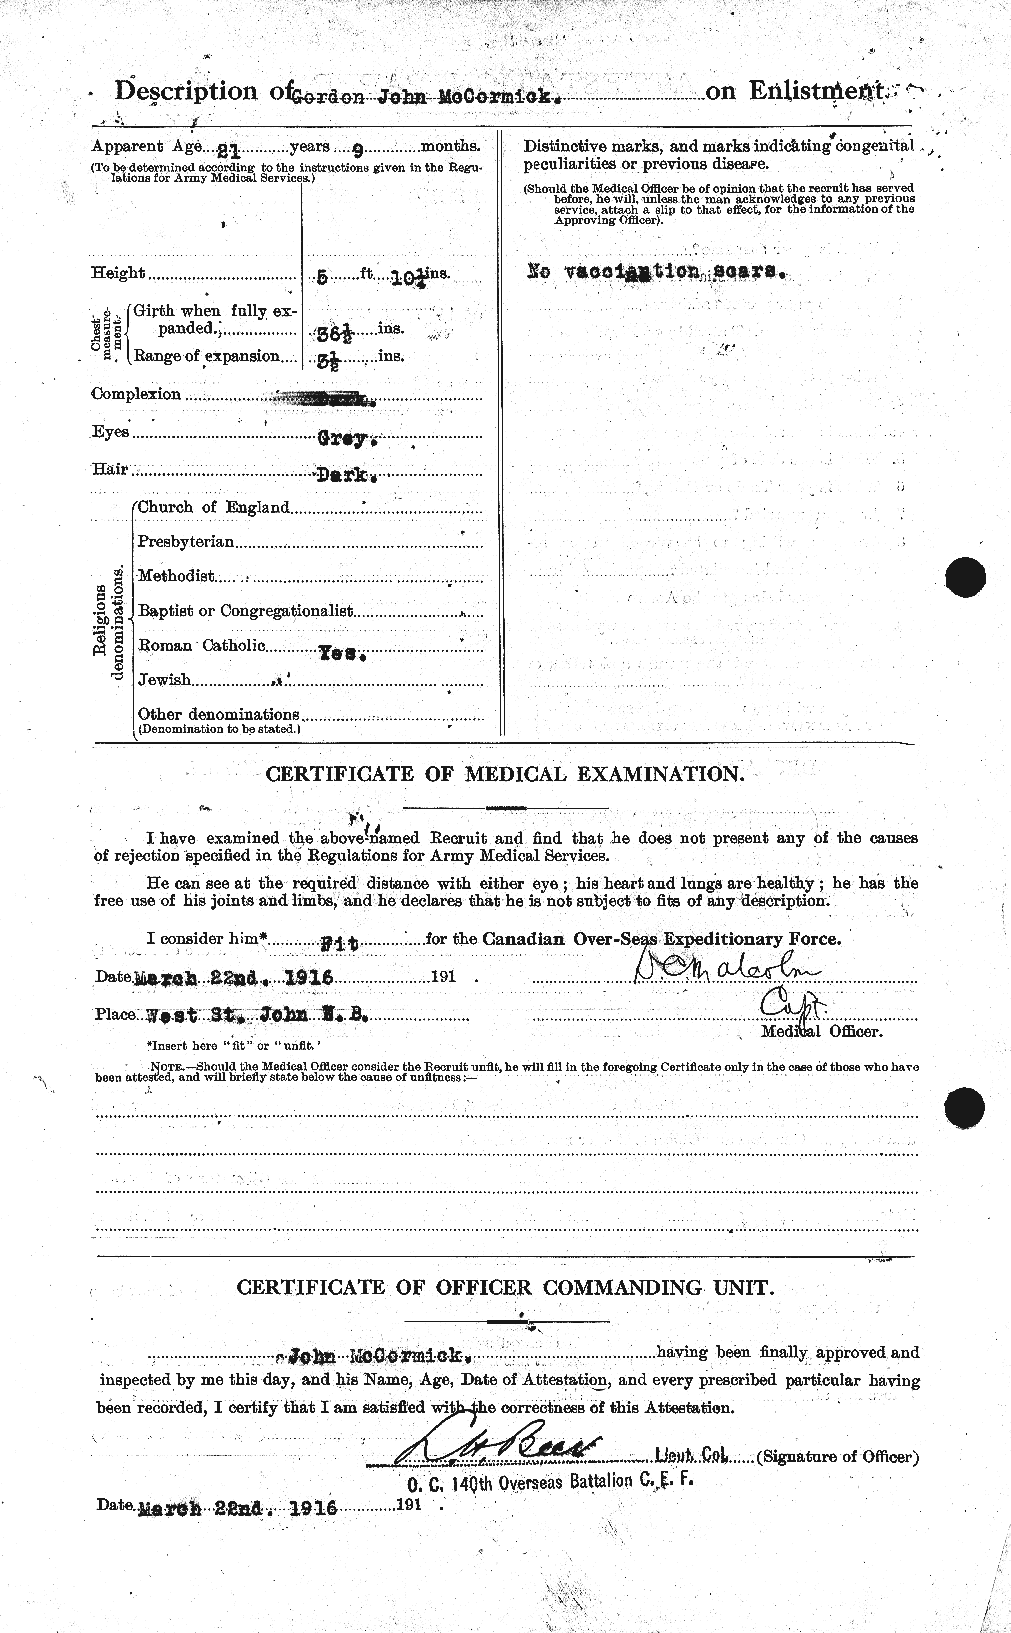 Personnel Records of the First World War - CEF 133746b